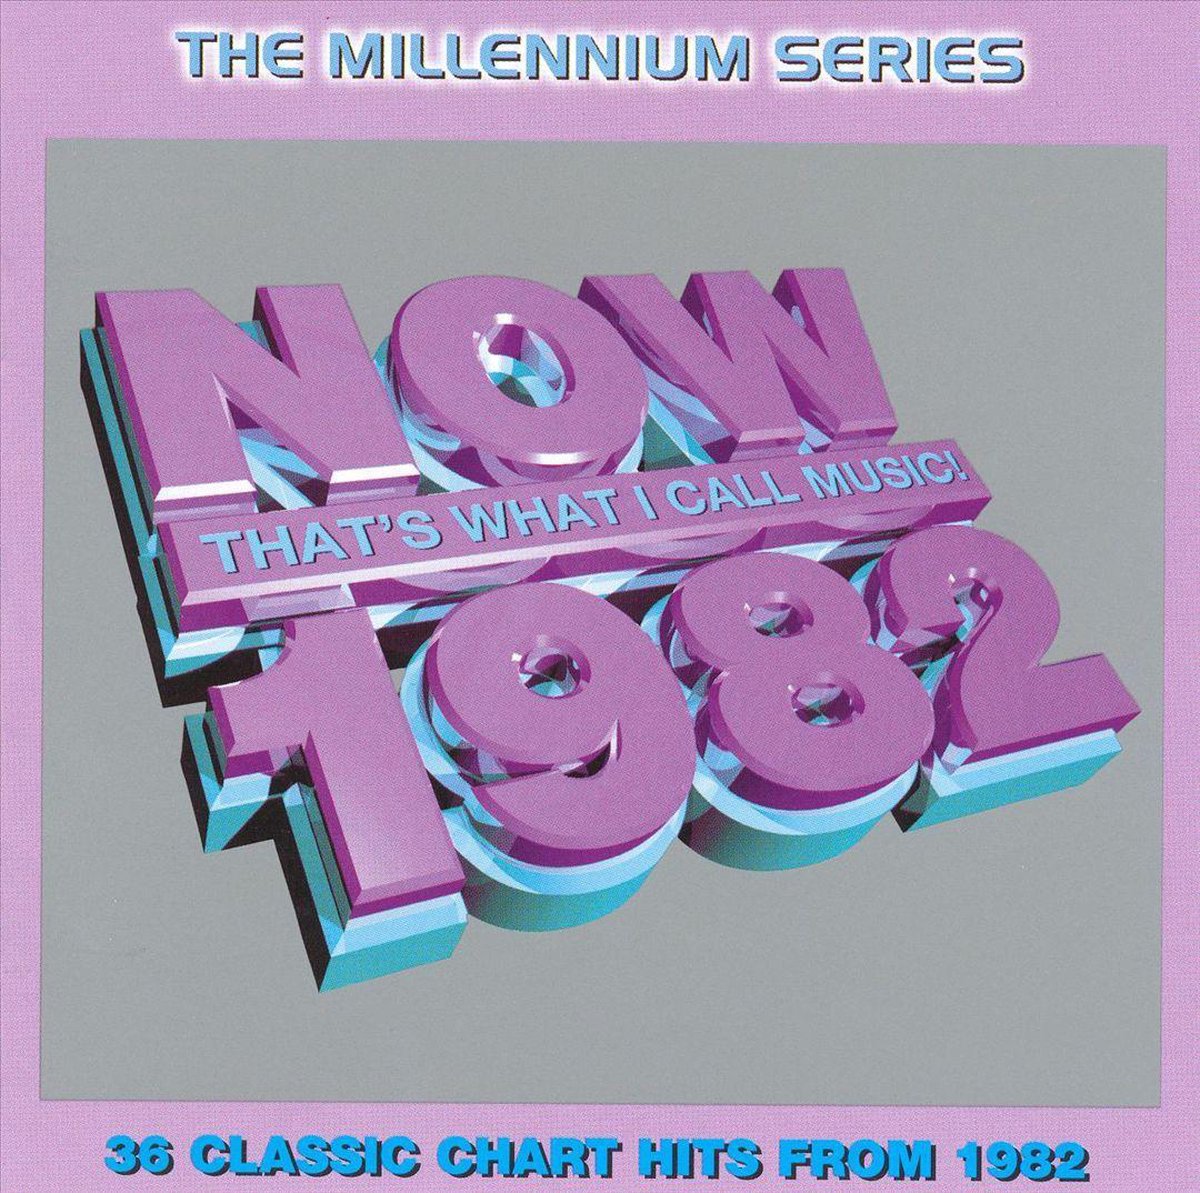 Now That's What I Call Music 1982 - various artists